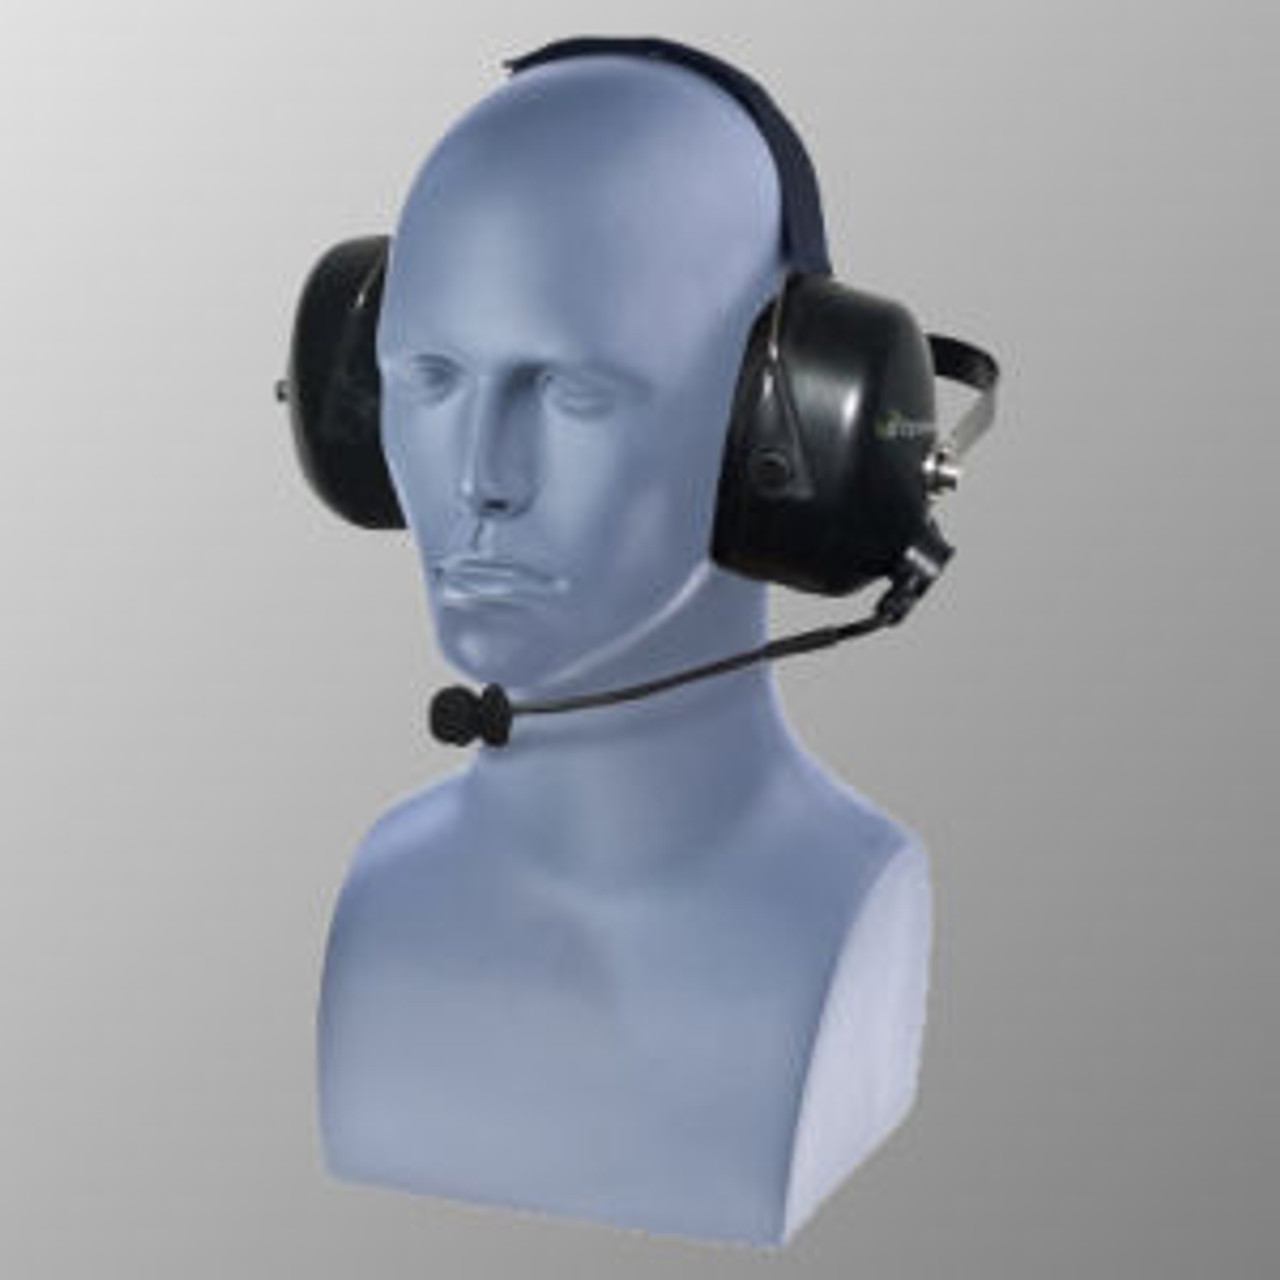 Motorola MTX900 (Old) Noise Canceling Double Muff Behind The Head Headset